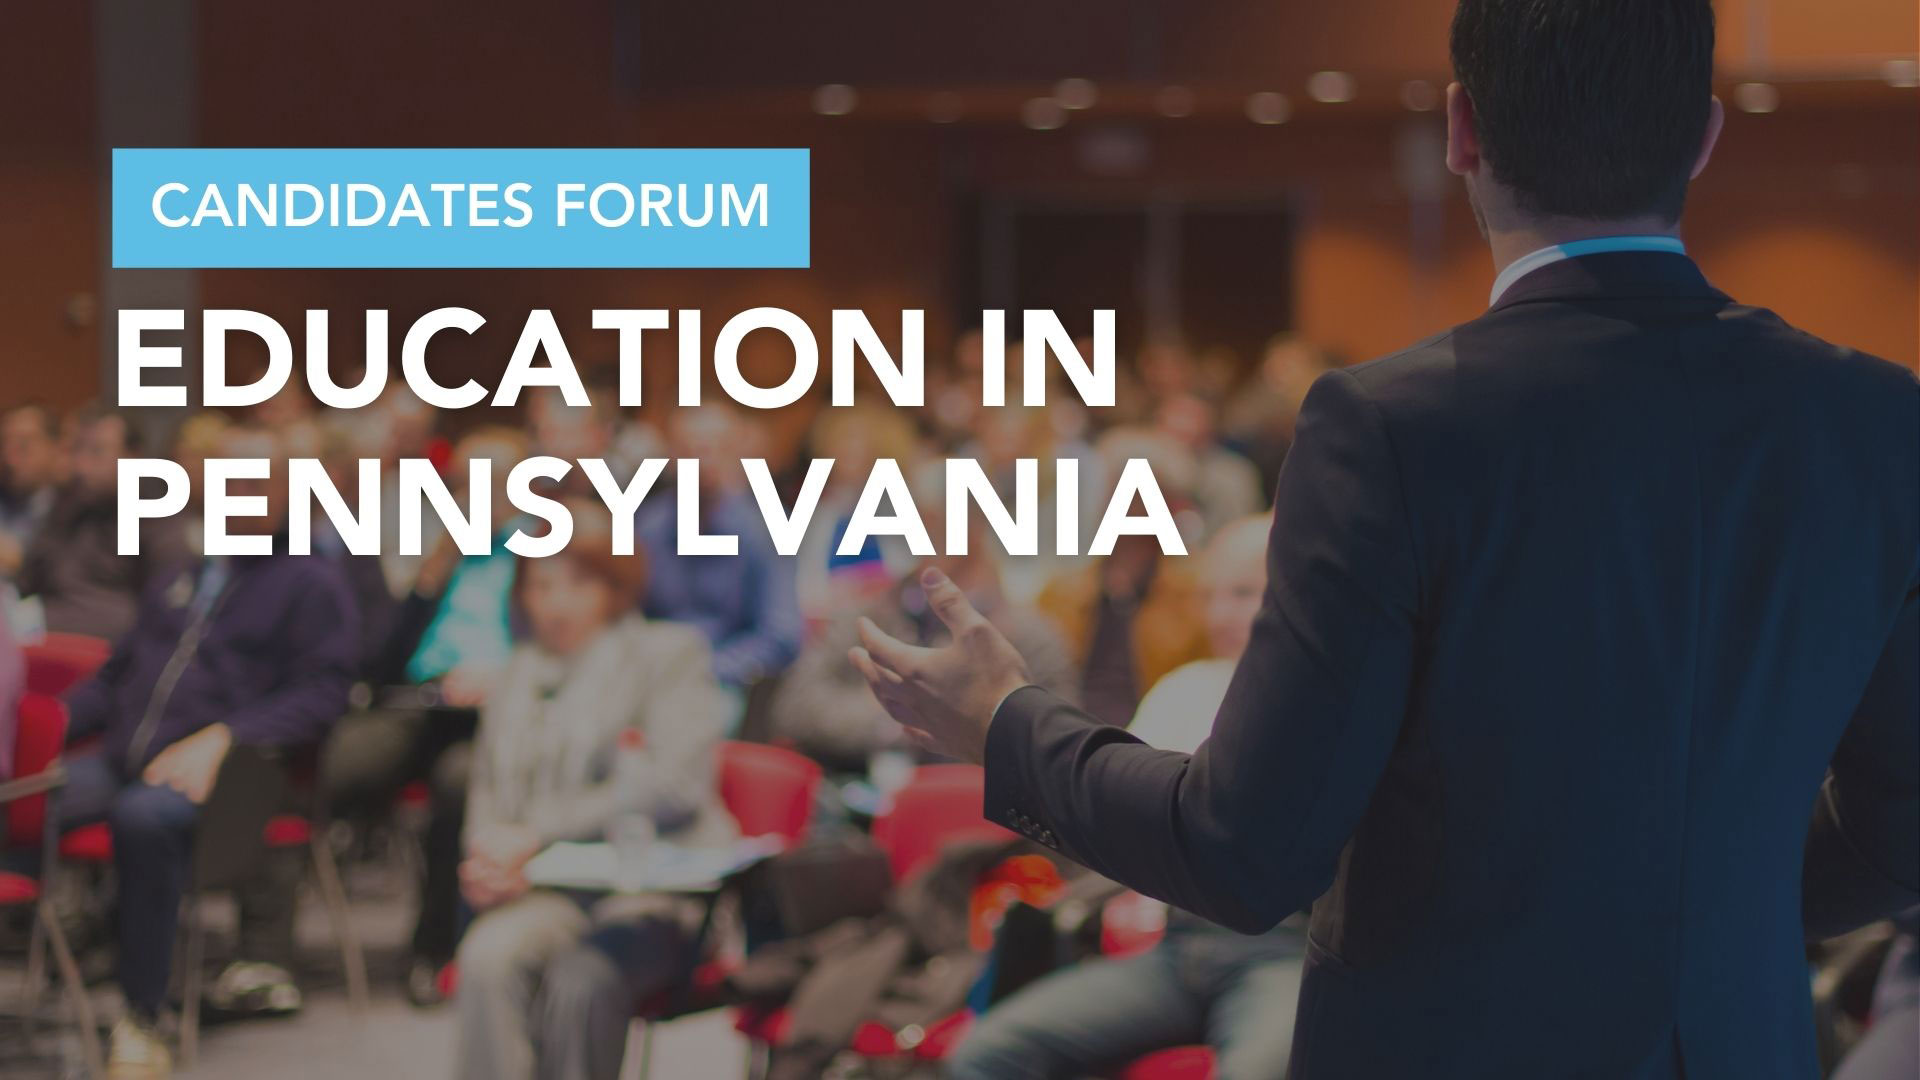 Text Candidates Forum: Education in Pennsylvania over blurred image of audience